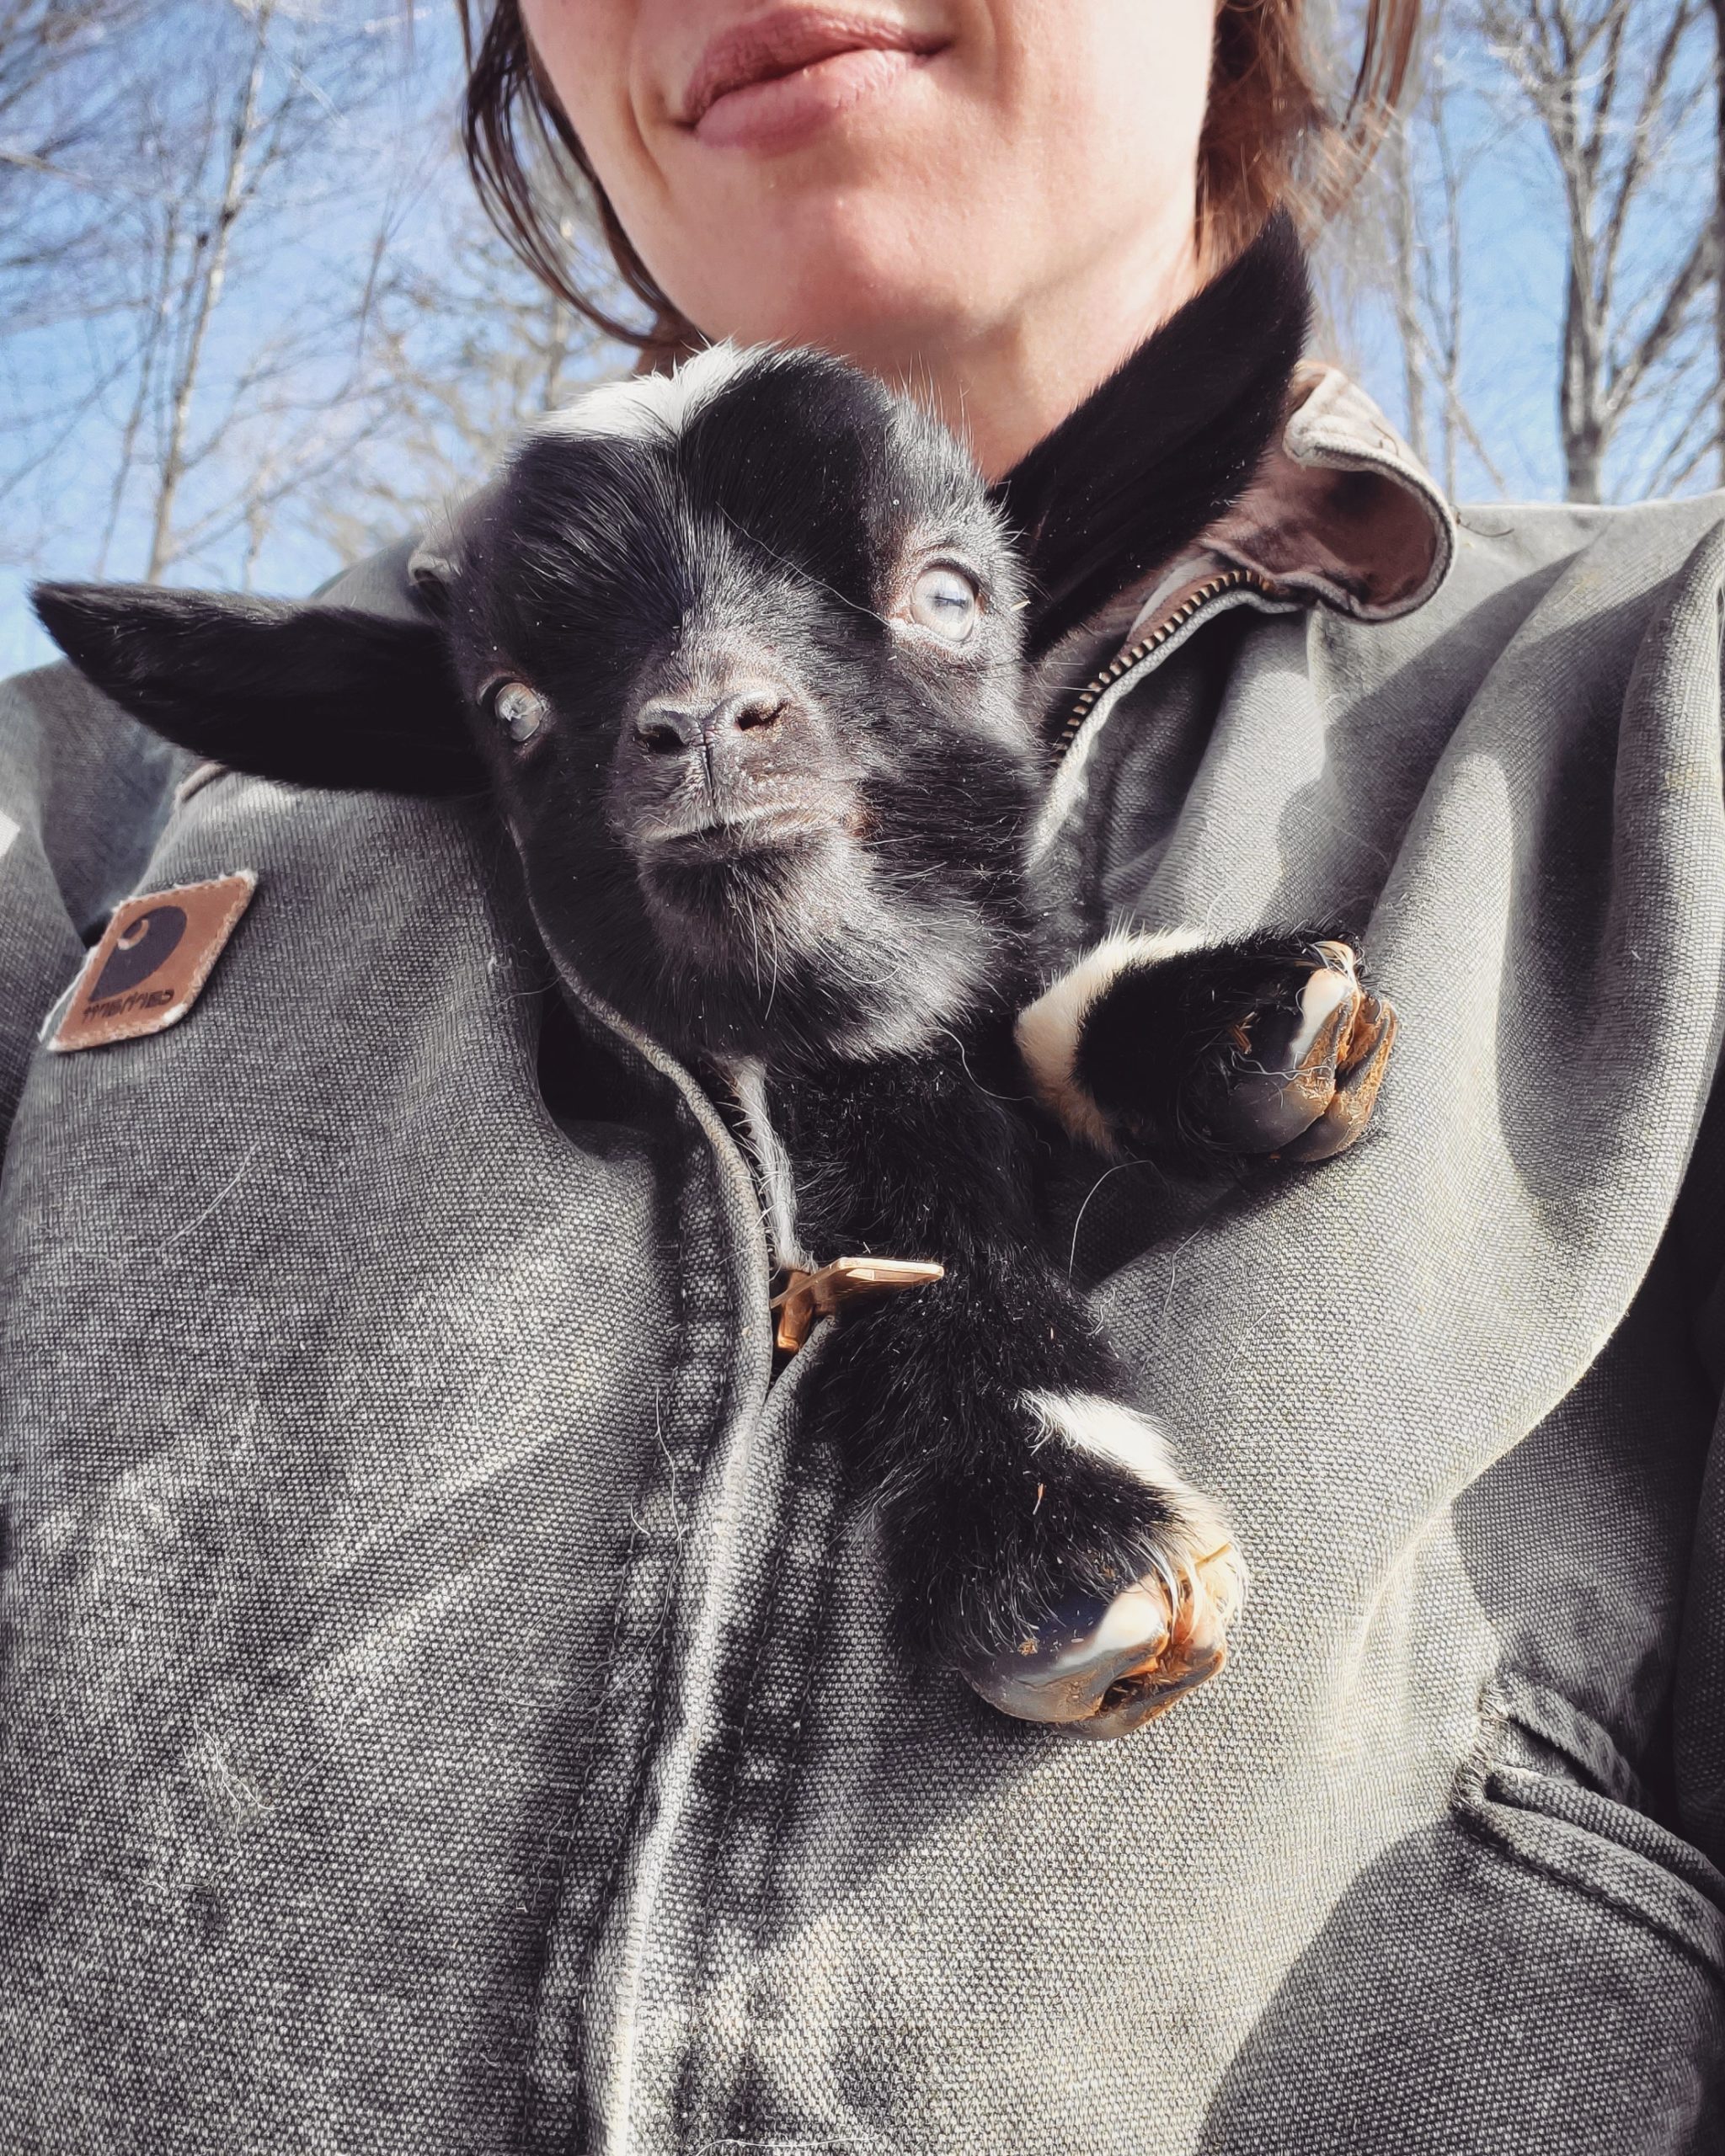 There%26%238217%3Bs+a+goat+in+my+coat%2C+dear+Darla%2C+a+goat.